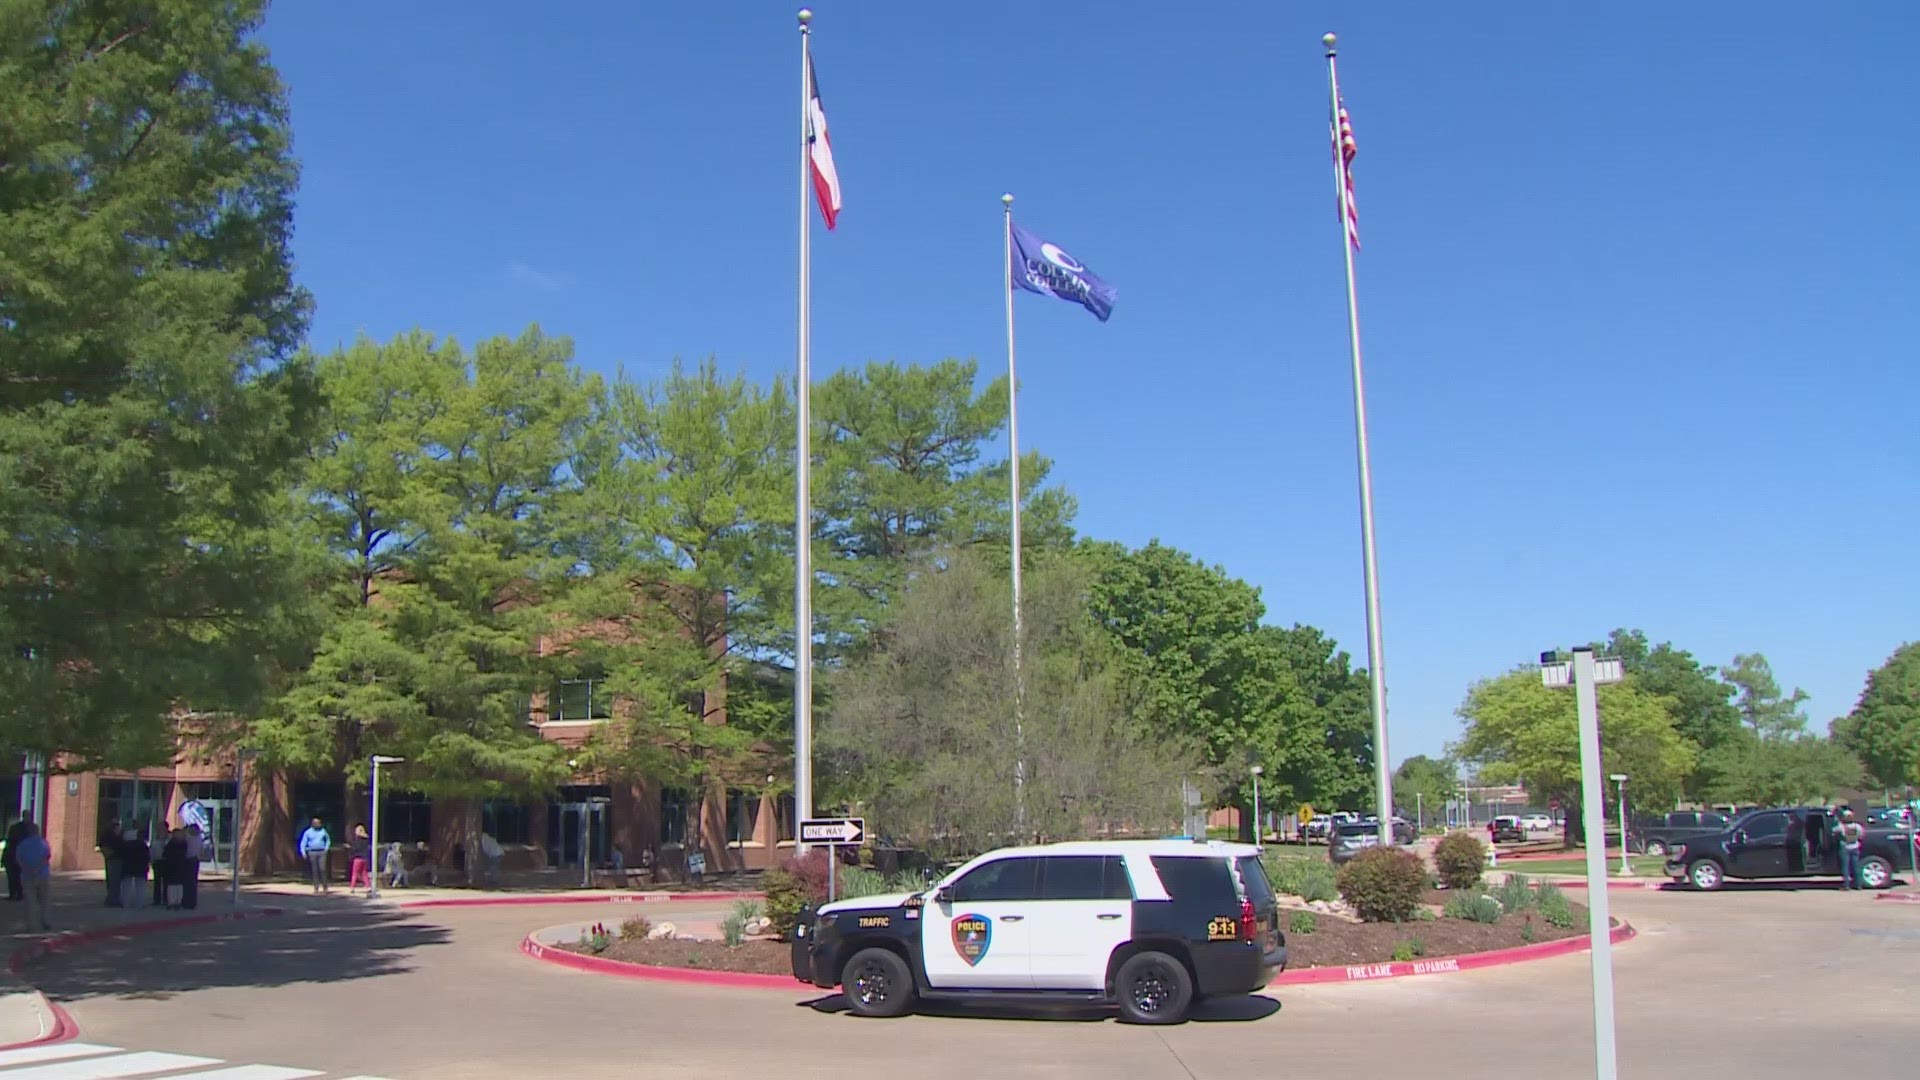 Over 100 law enforcement agencies responded to Collin College.